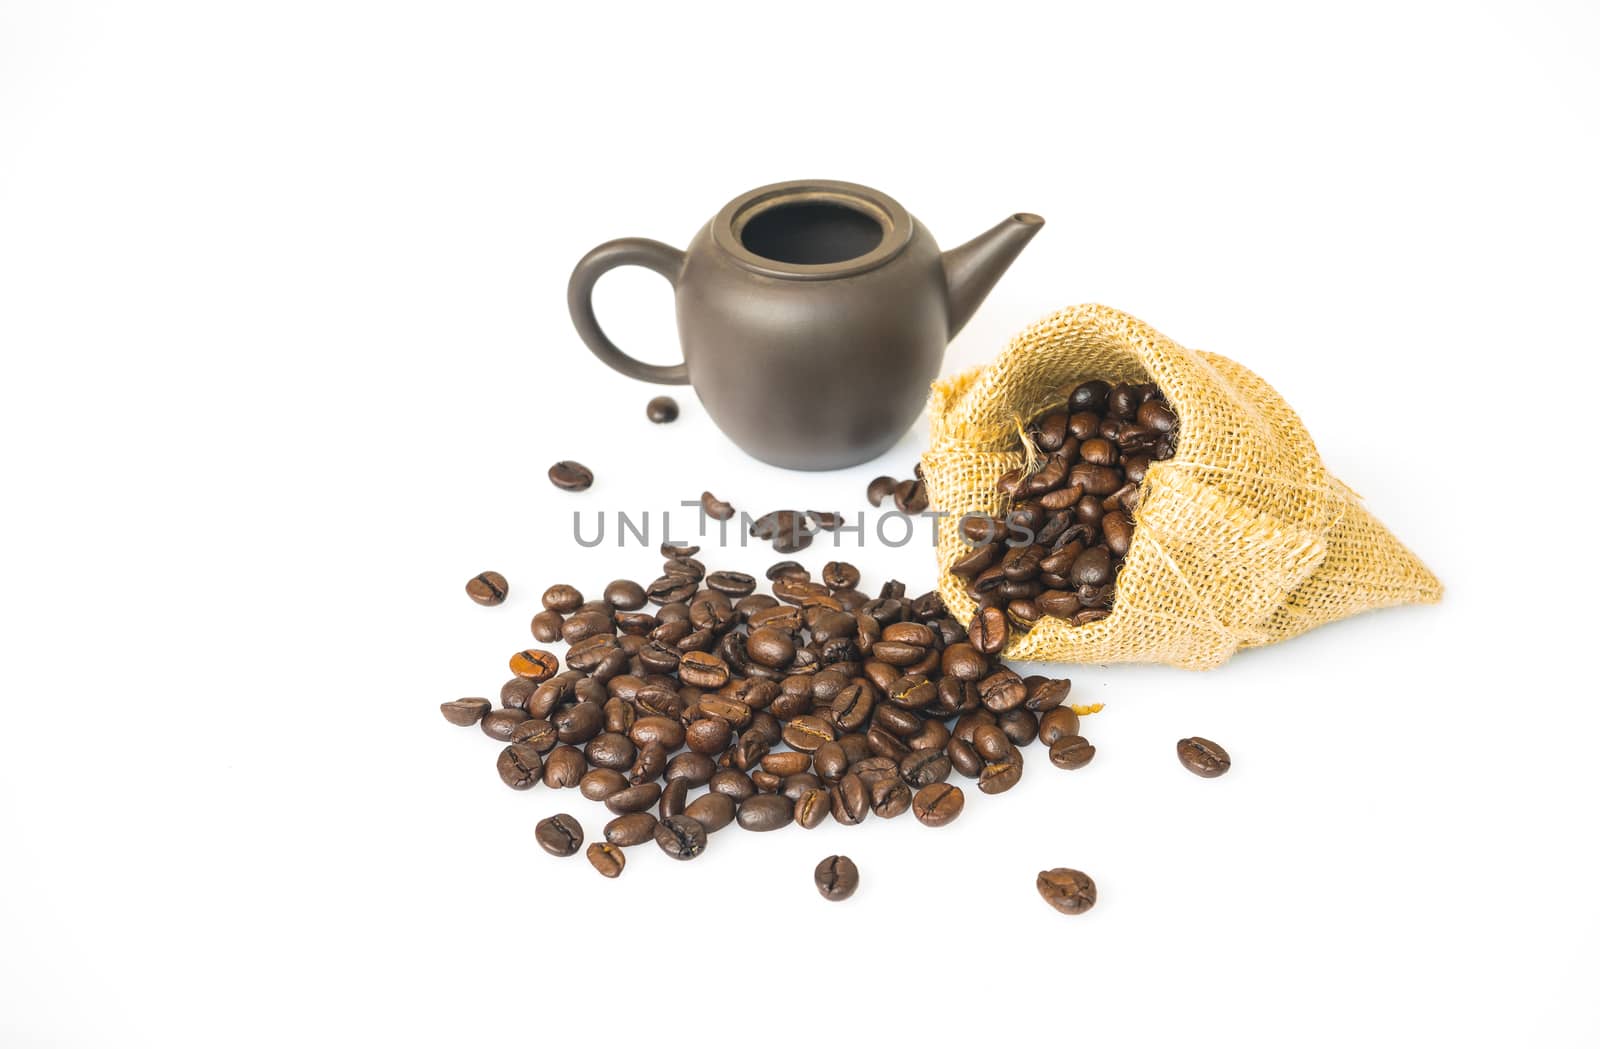 Coffee beans on a sack with Ancient pots on a white background by zGel